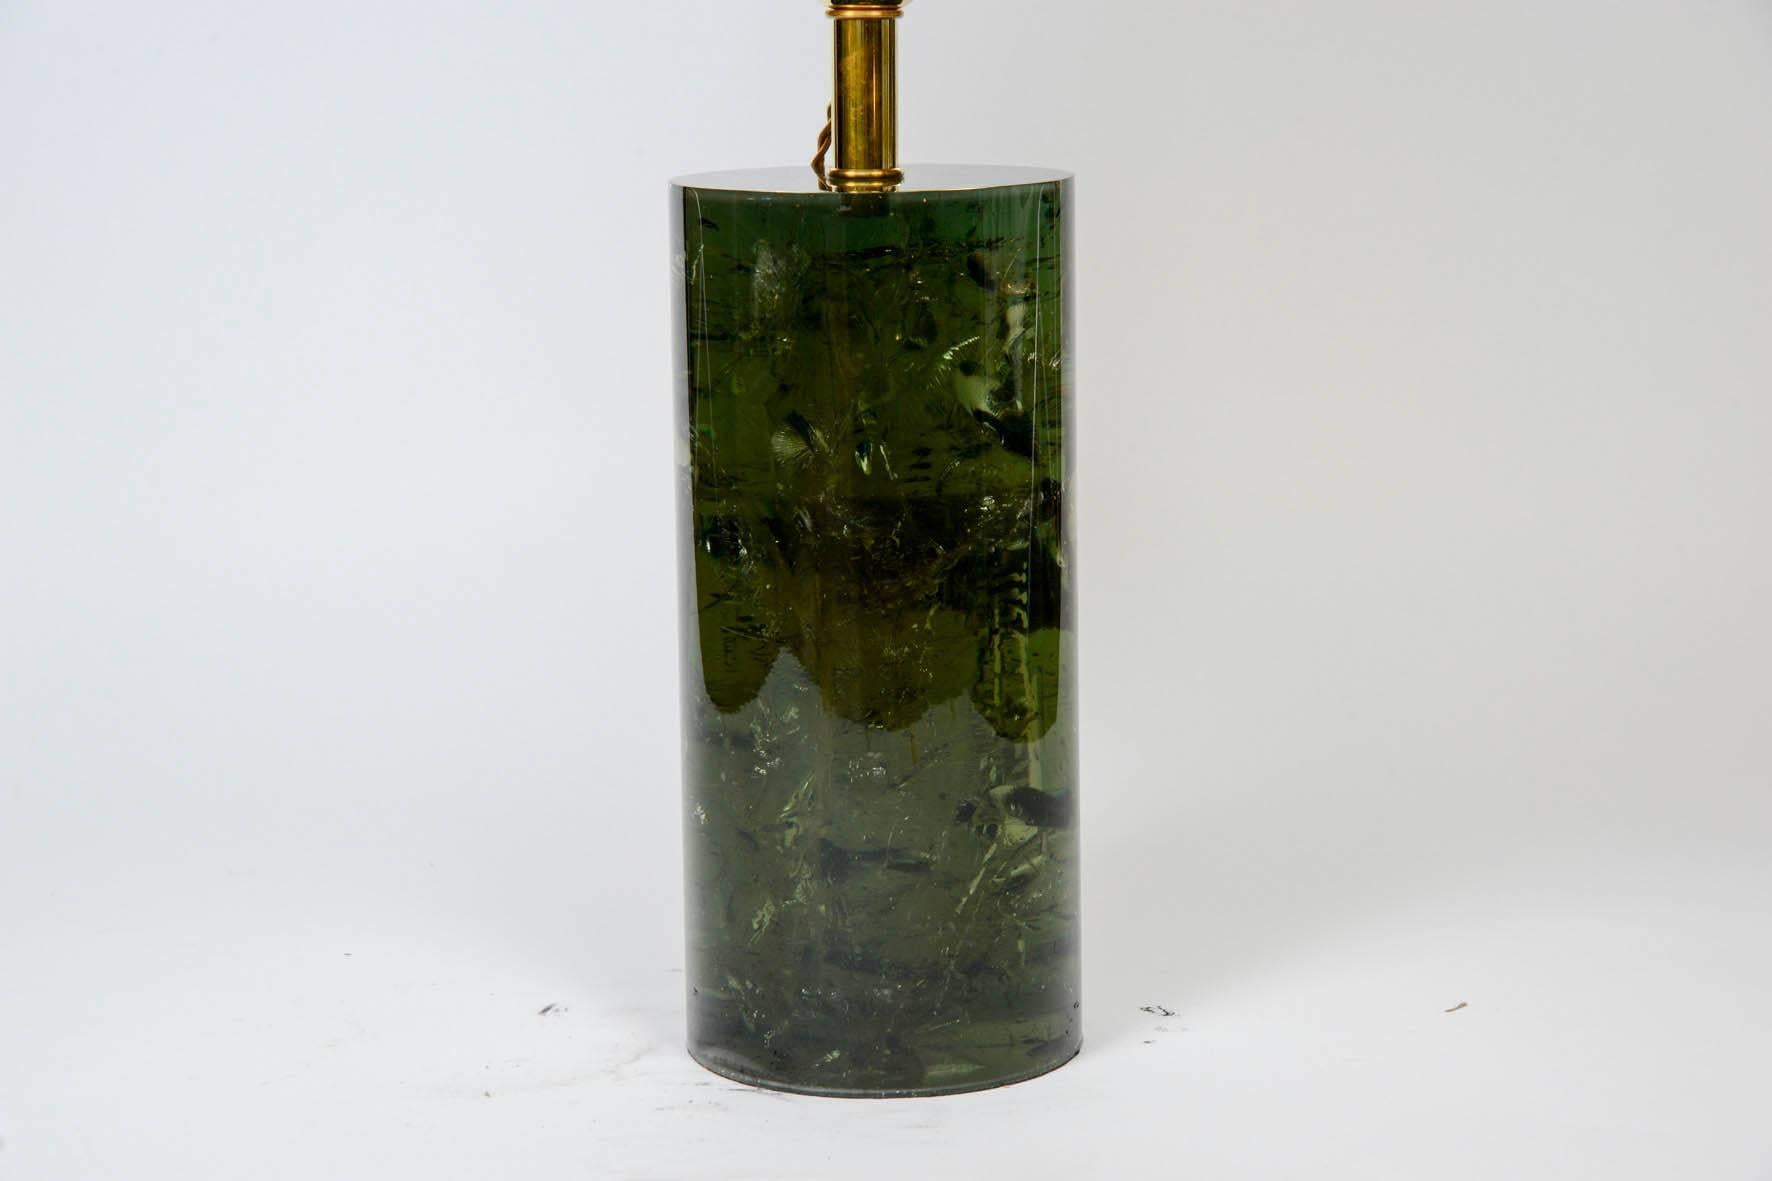 Pair of imposing table lamps made in a deep green fractal resin. Brass neck.